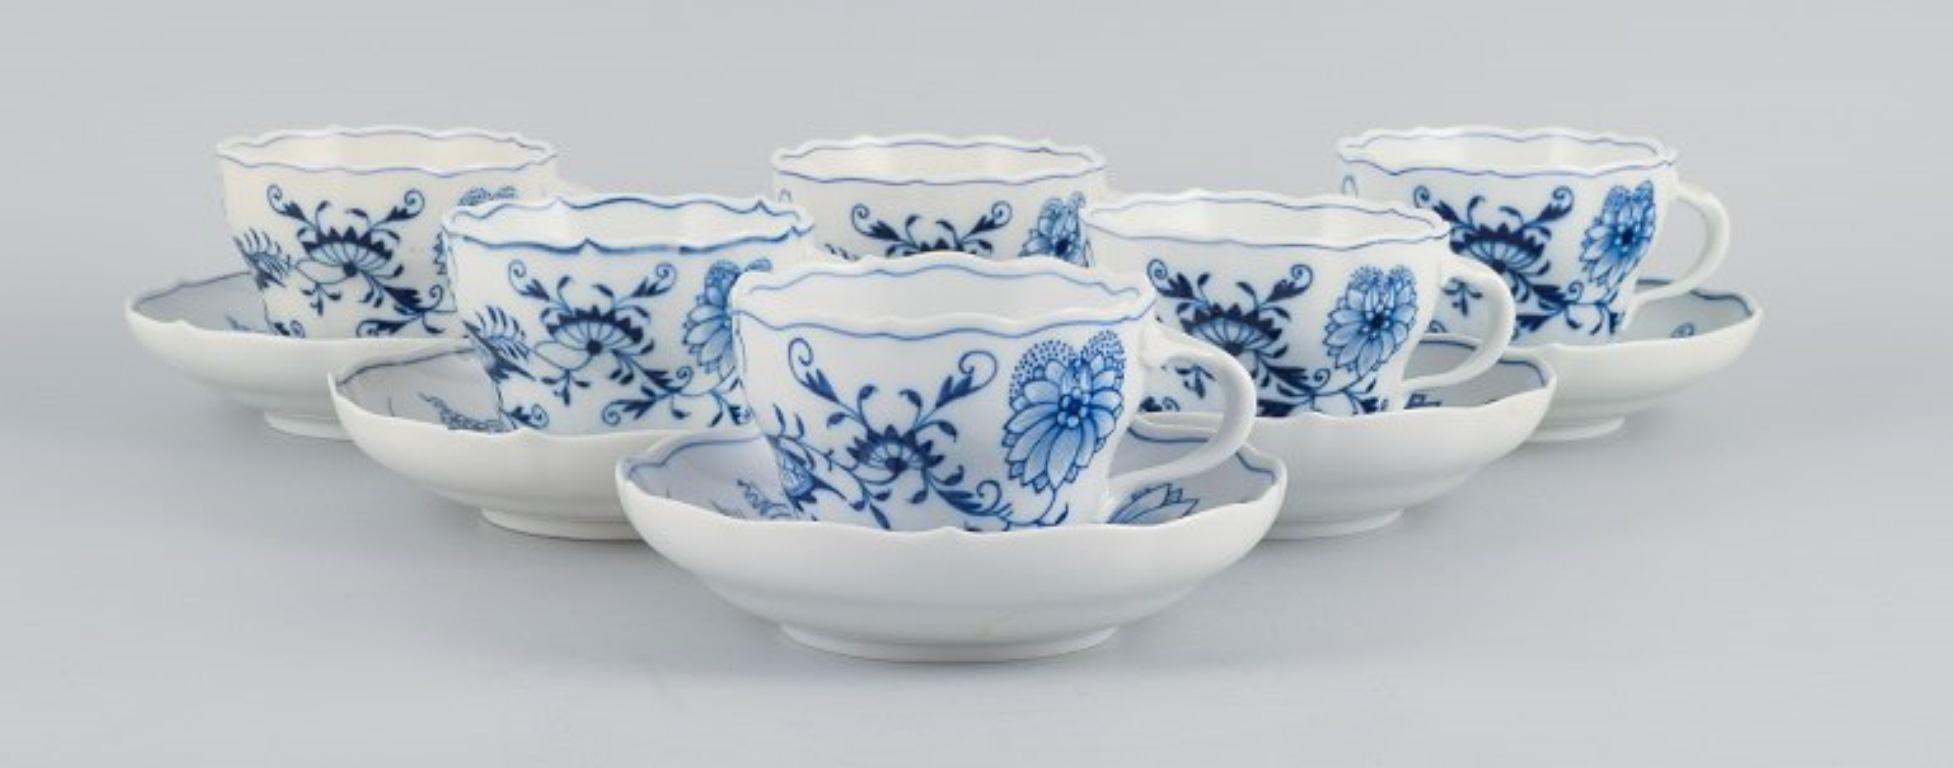 Meissen, Germany. Six Meissen Blue Onion coffee cups with saucers in hand-painted porcelain.
Approx. 1930s.
In excellent condition.
Marked.
First factory quality.
Cup: D 8.8 x H 6.7 cm.
Saucer: D 14.0 x H 3.0 cm.
The measurements may vary